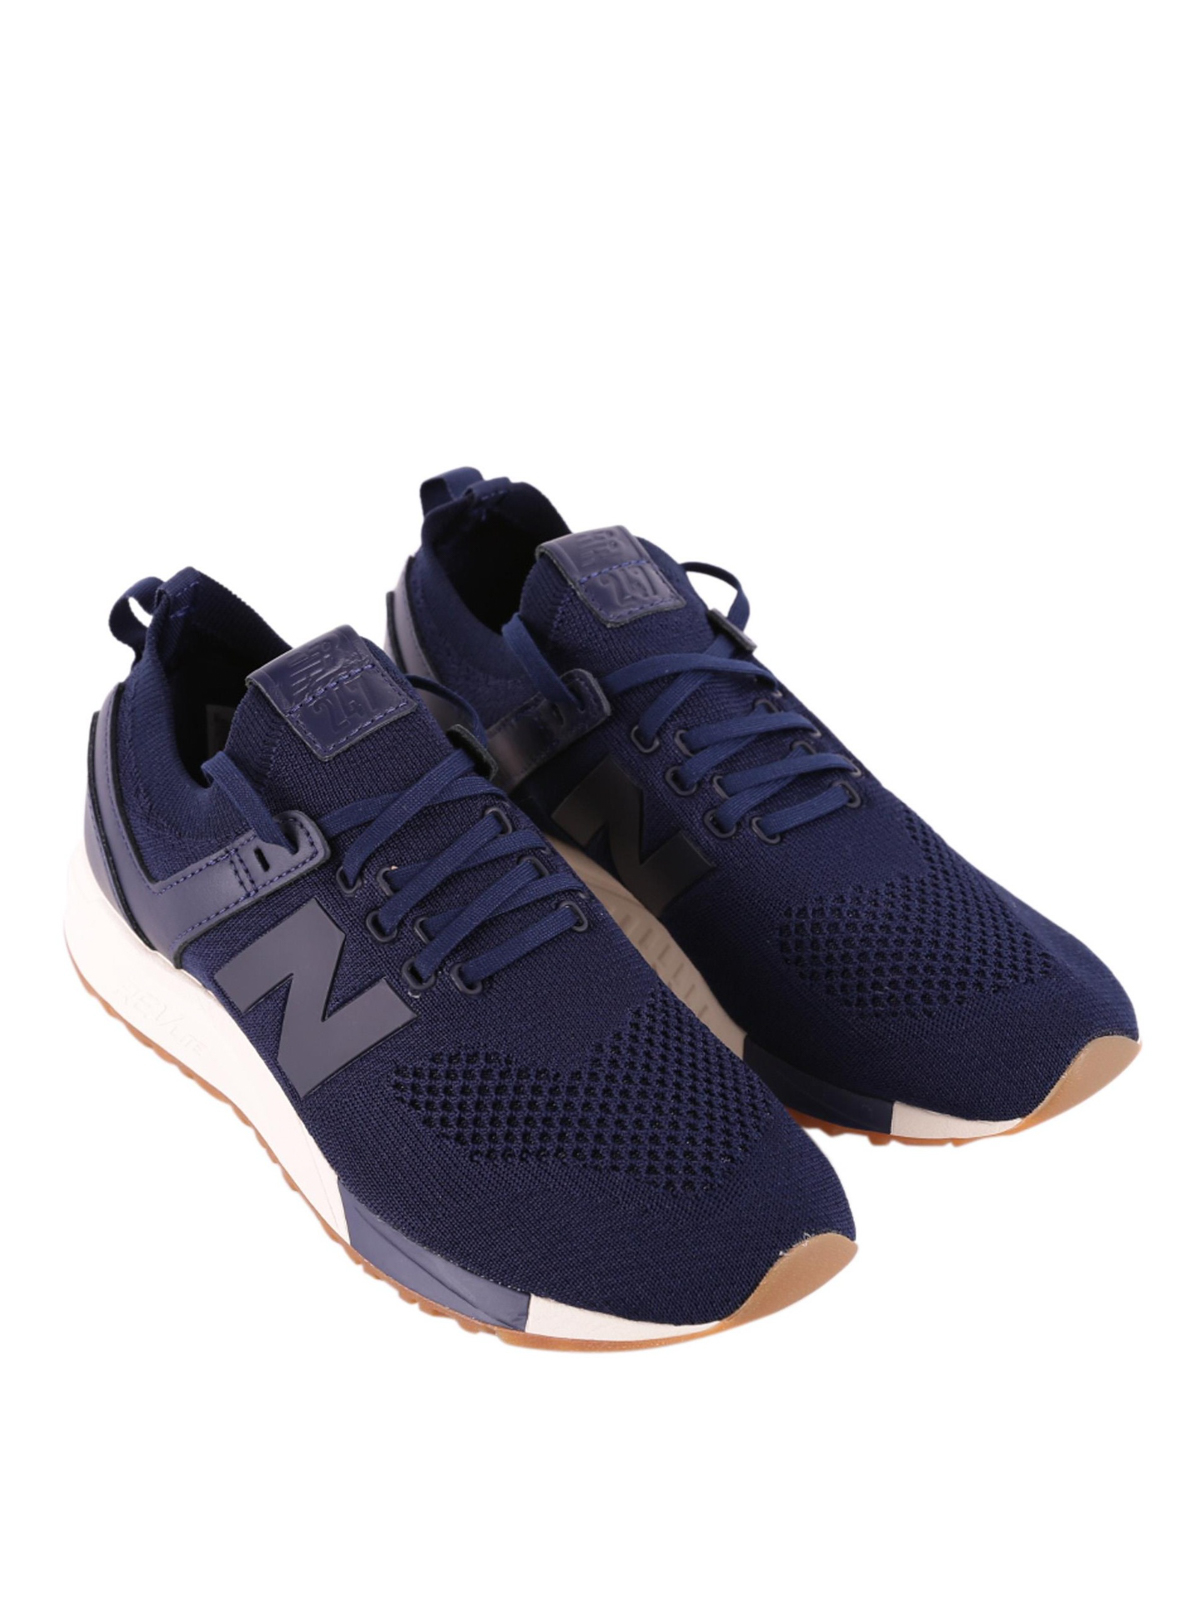 247 Decon New Balance Outlet Sale, UP TO 65% OFF